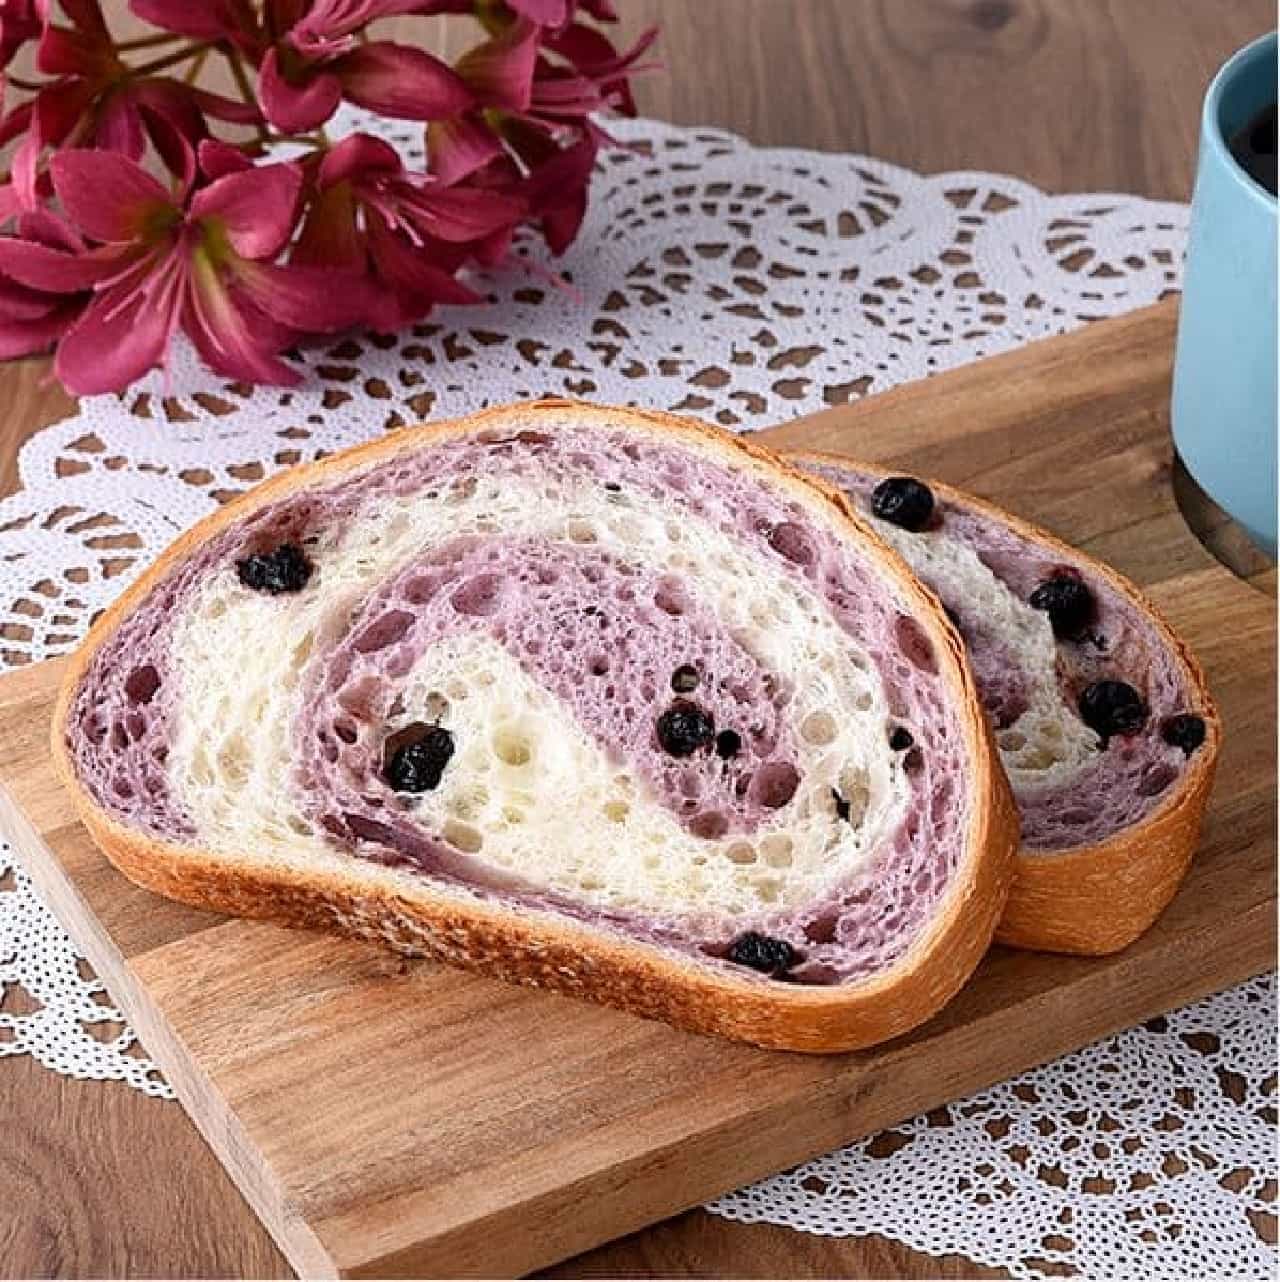 FamilyMart "2 pieces of chunky blueberry French bread"